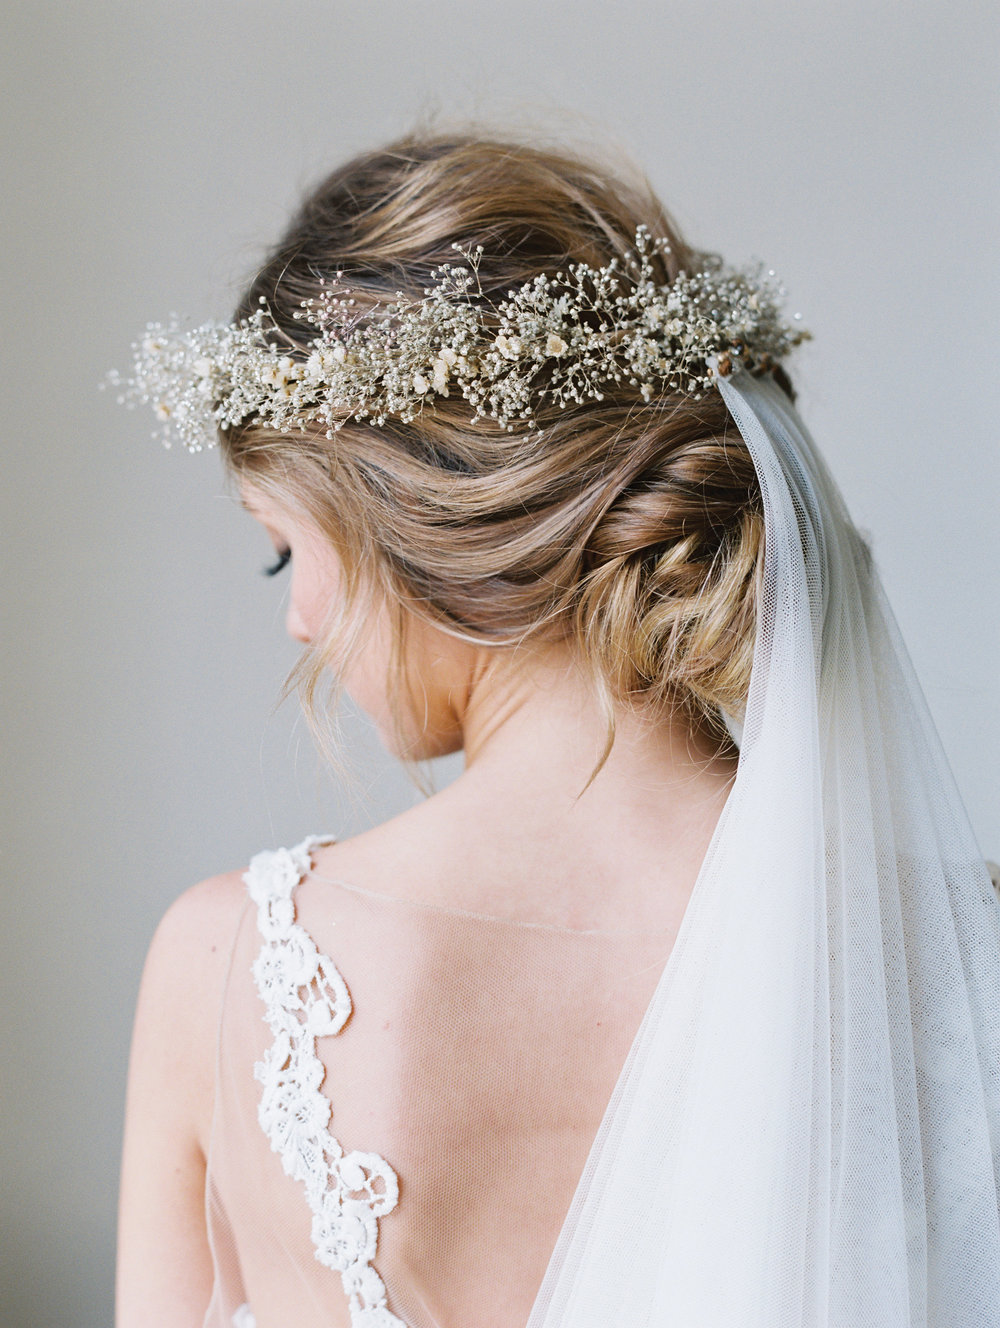 Trending Bridal Bun Hairstyle With Flowers For Wedding